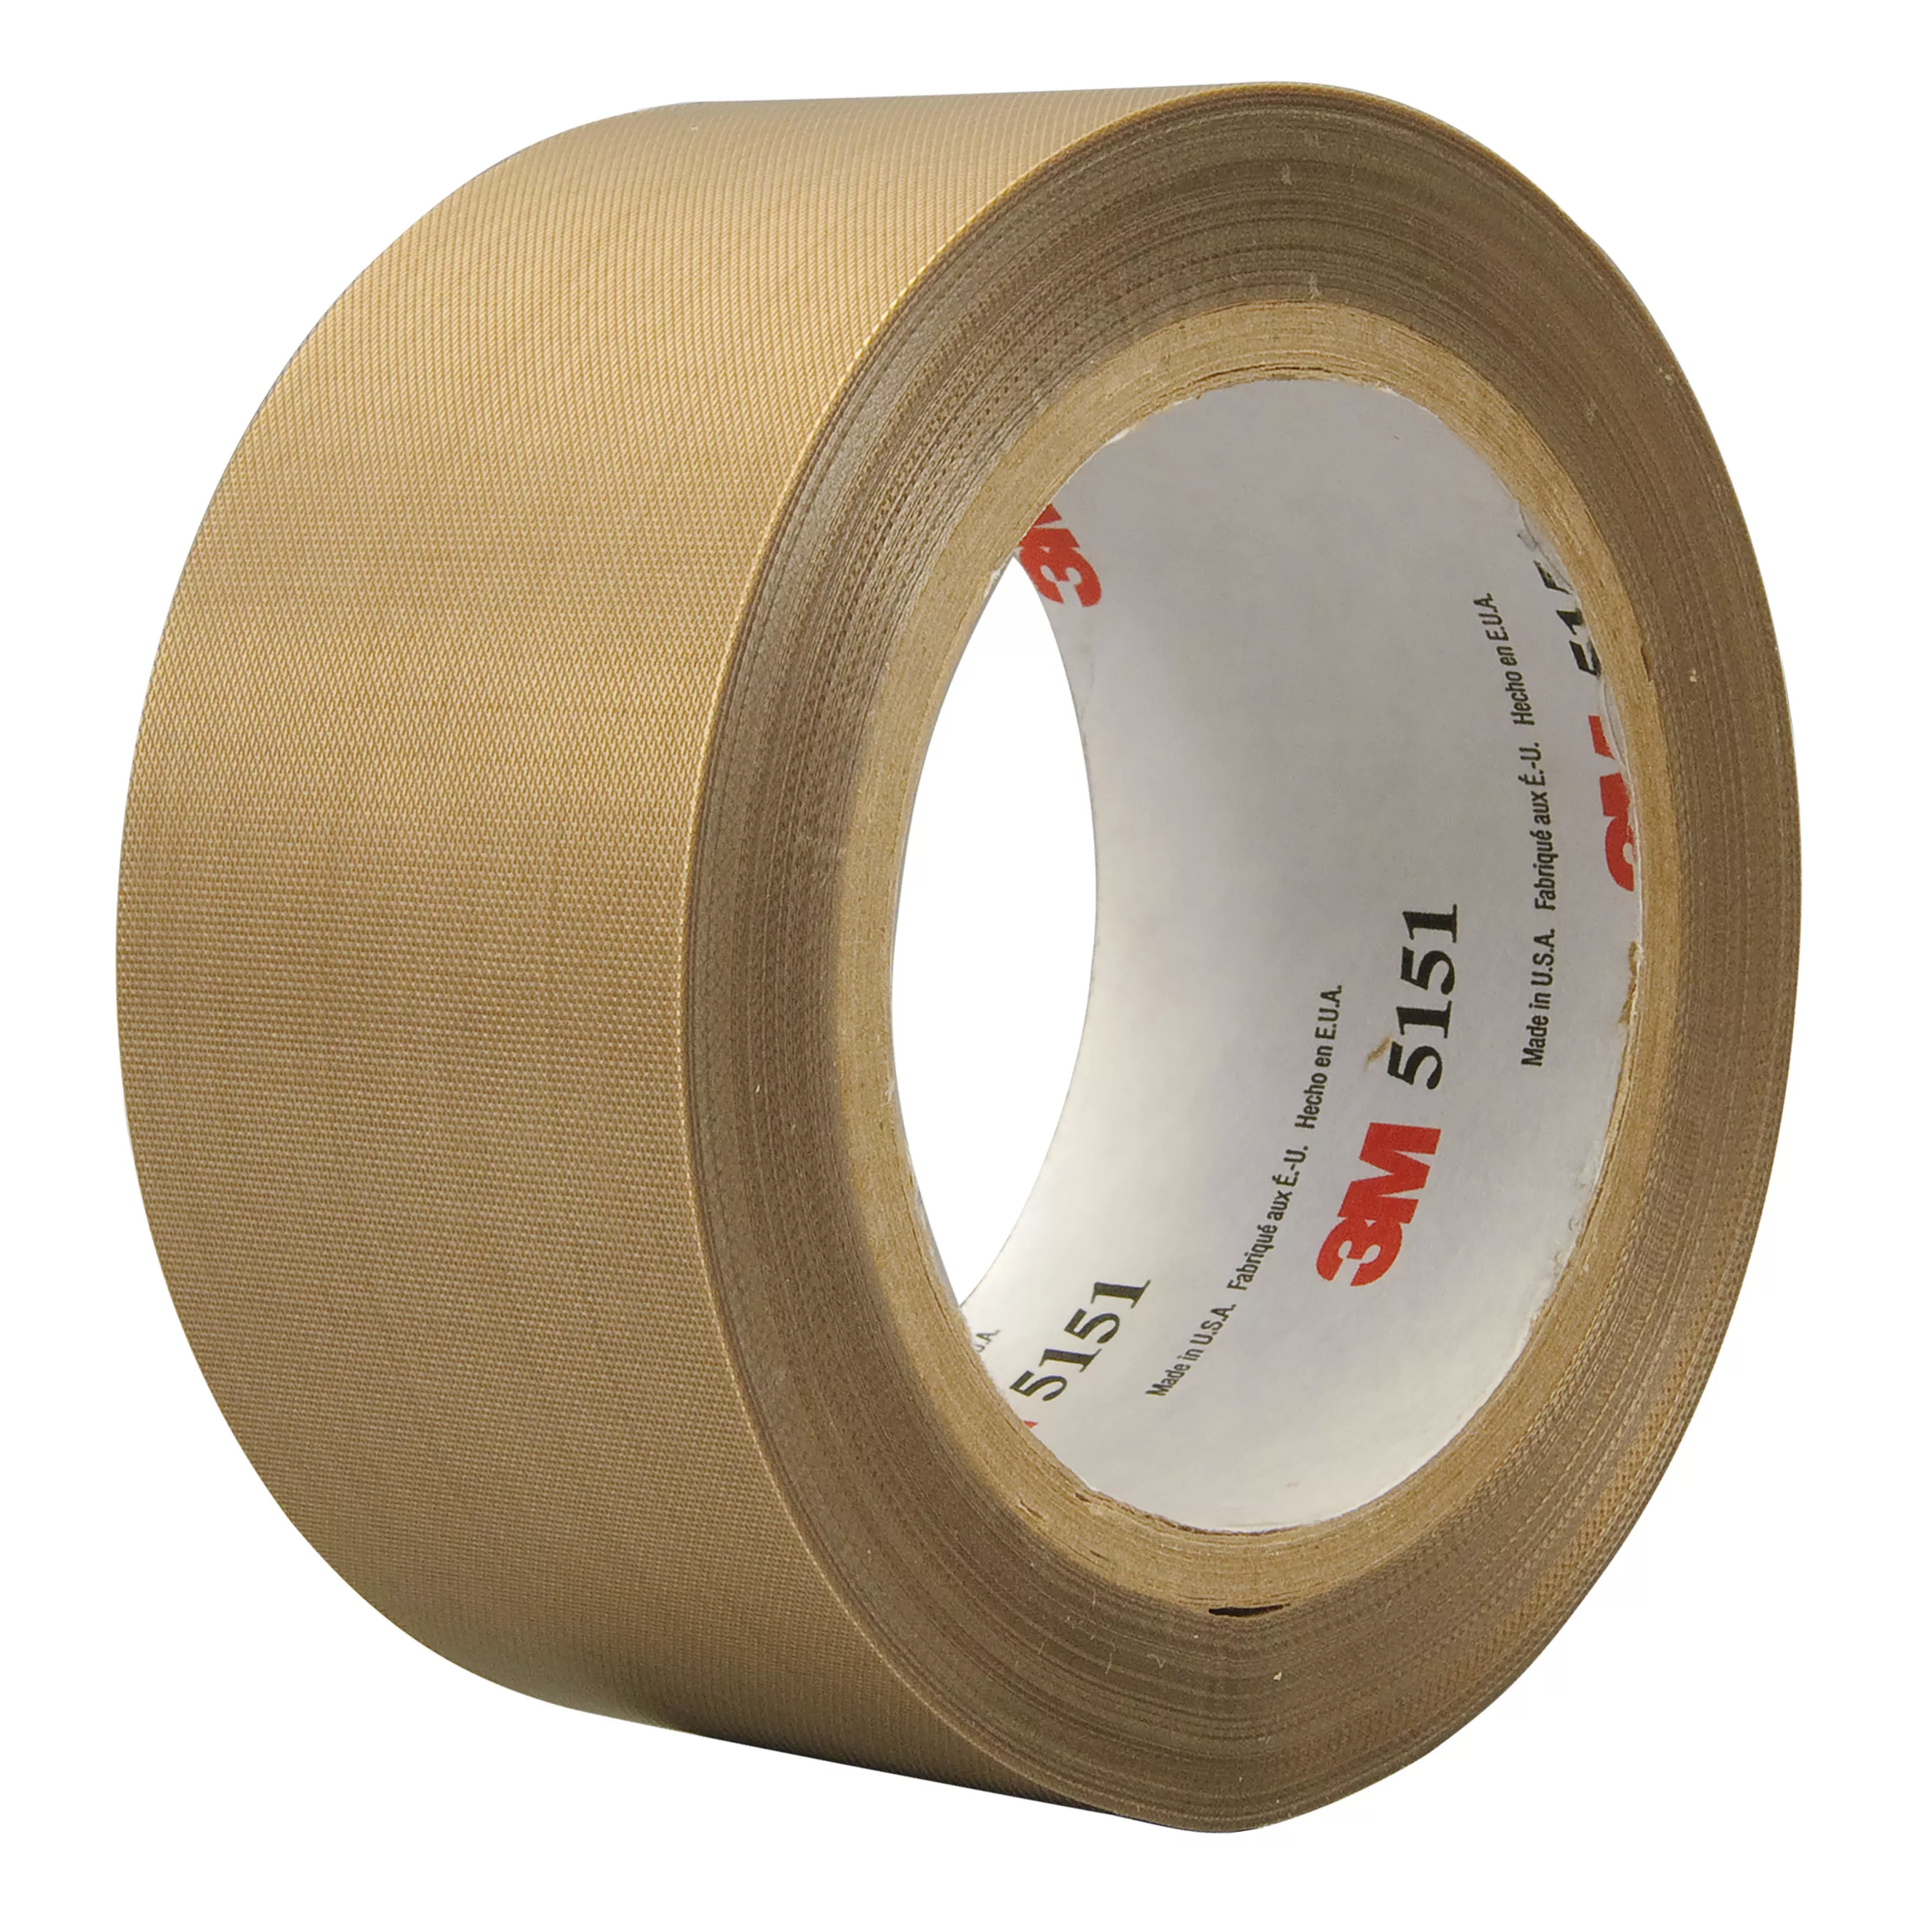 3M™ General Purpose PTFE Glass Cloth Tape 5151, Light Brown, 1 in x 36
yd, 5.3 mil, 36 Roll/Case